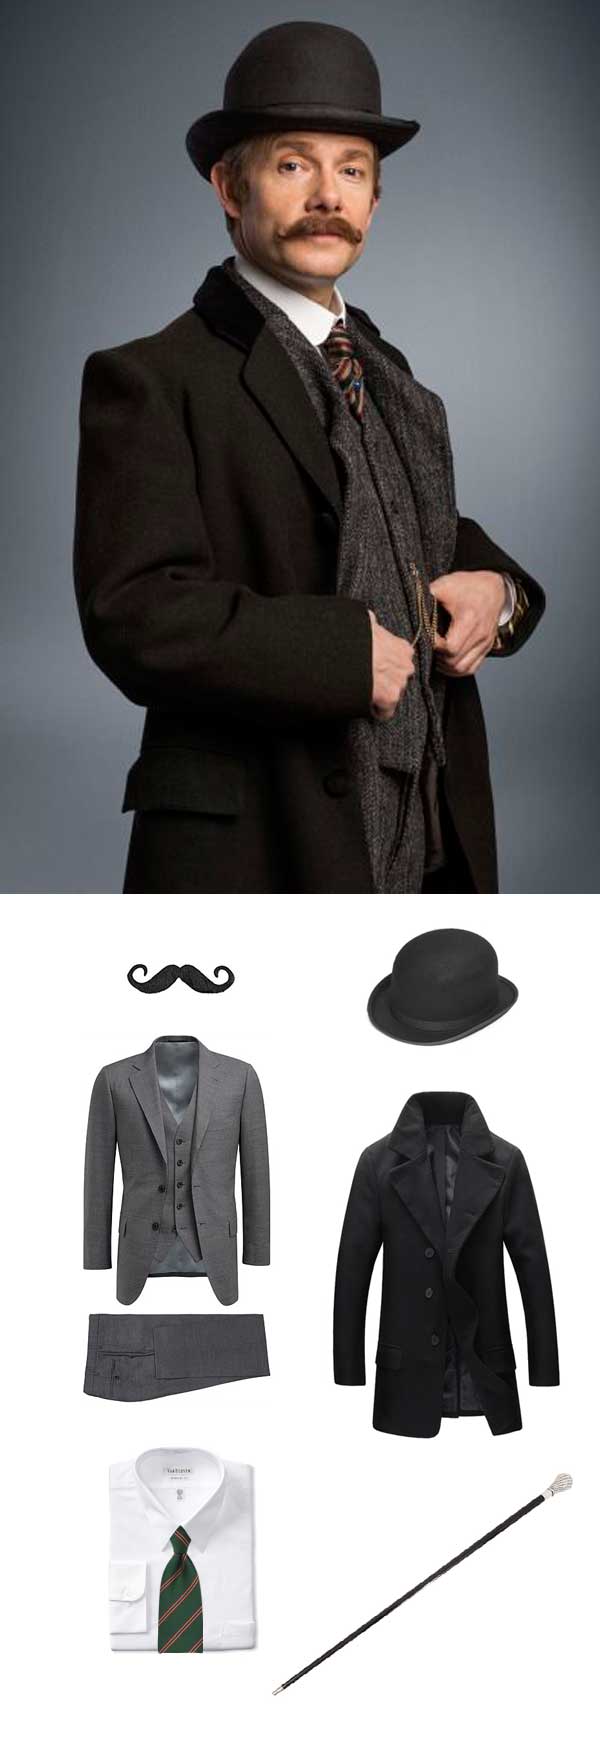 Dr. Watson Costume Halloween Outfit